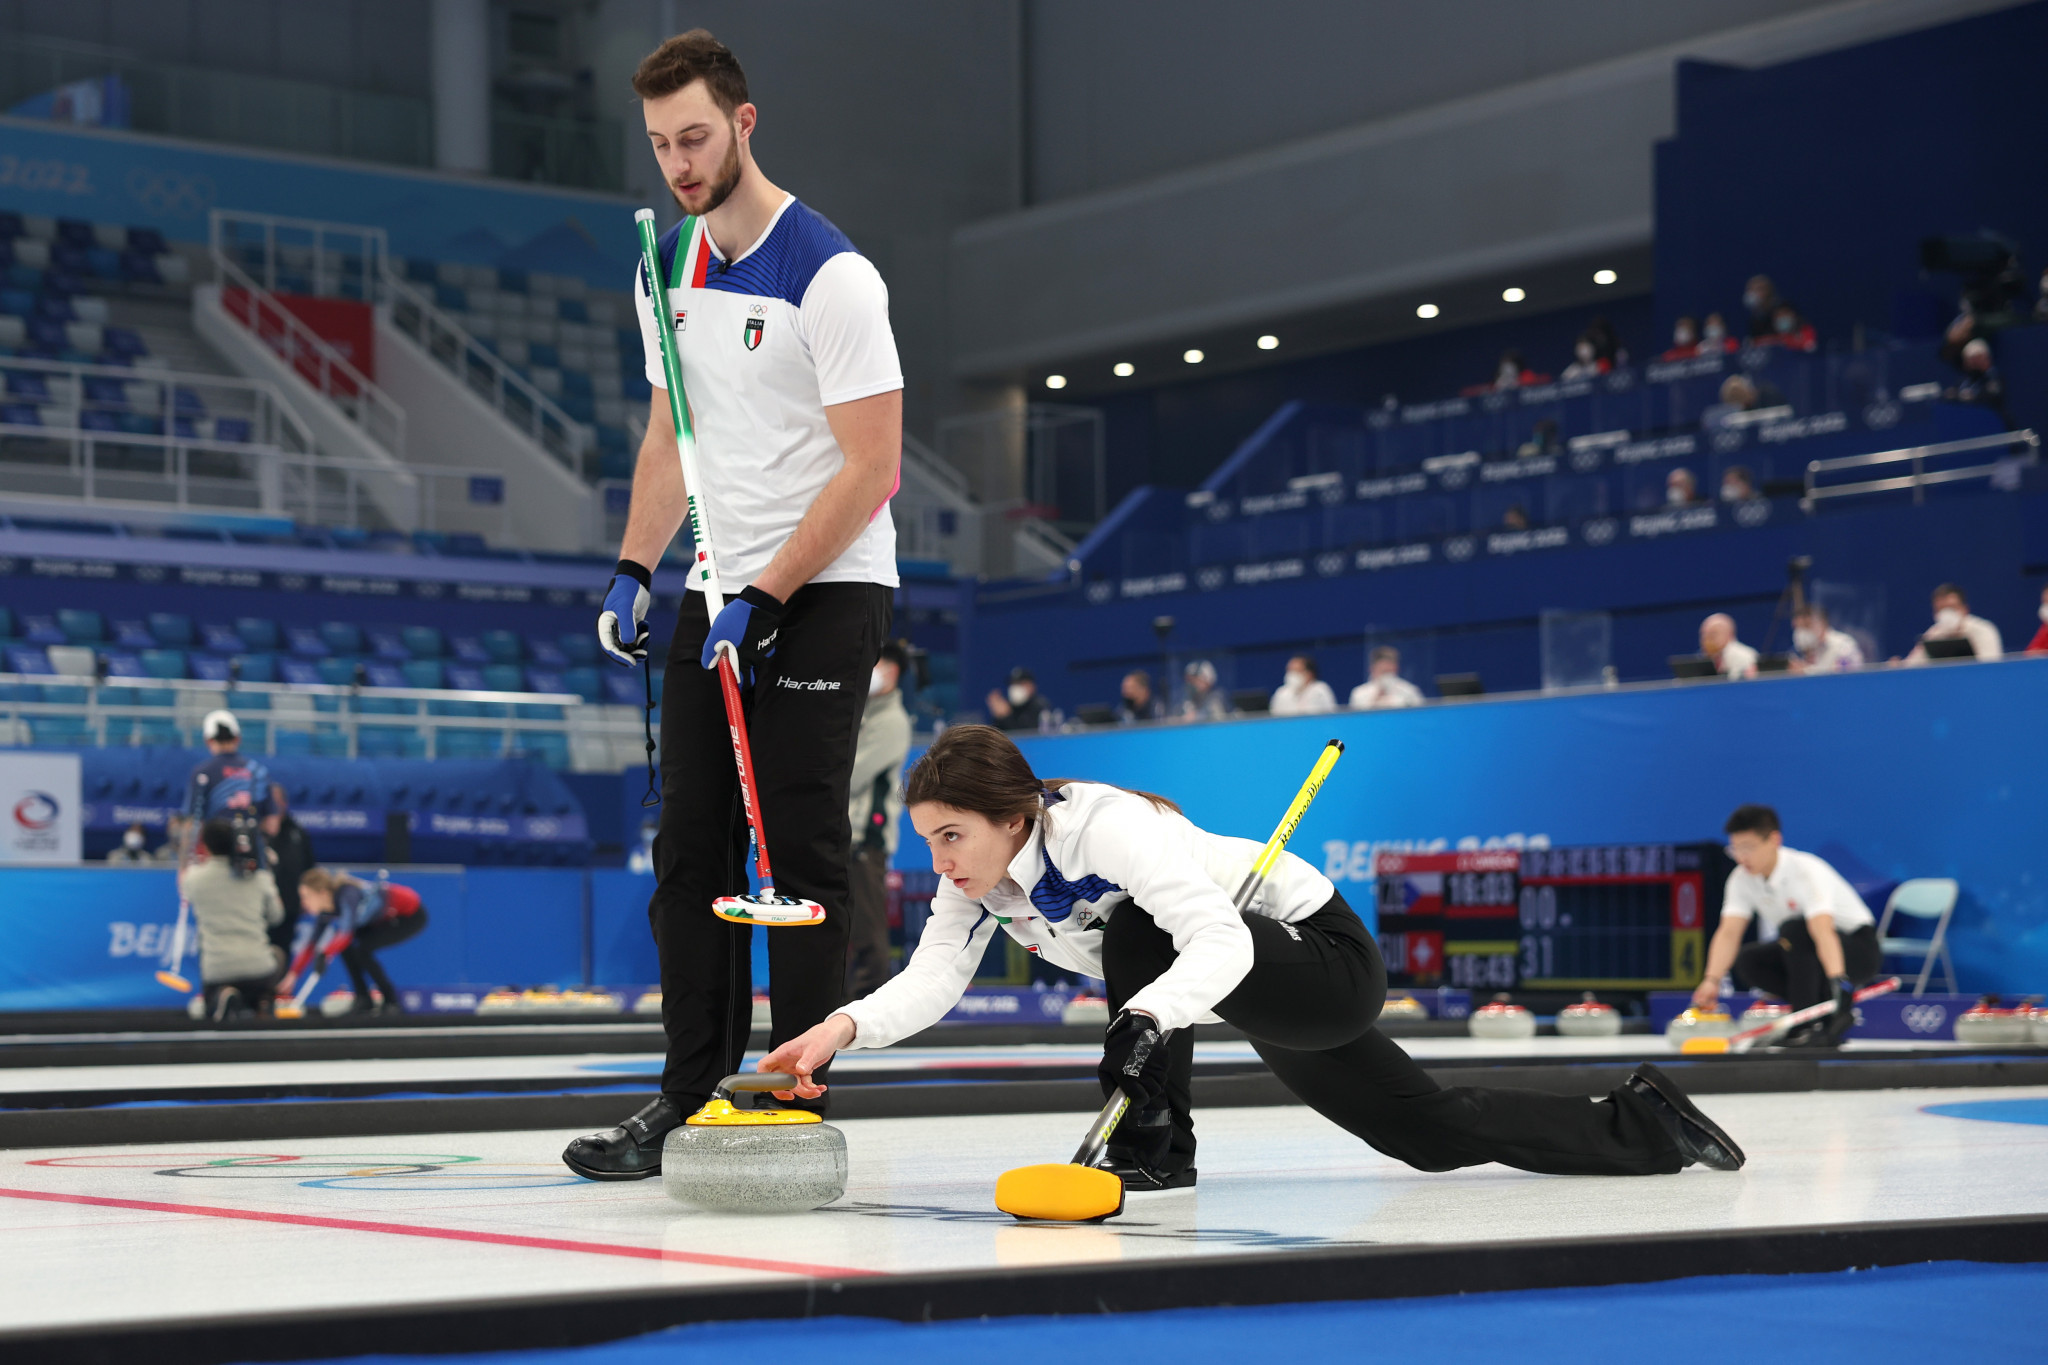 Italy are still unbeaten after getting the better of Britain in the mixed doubles curling ©Getty Images